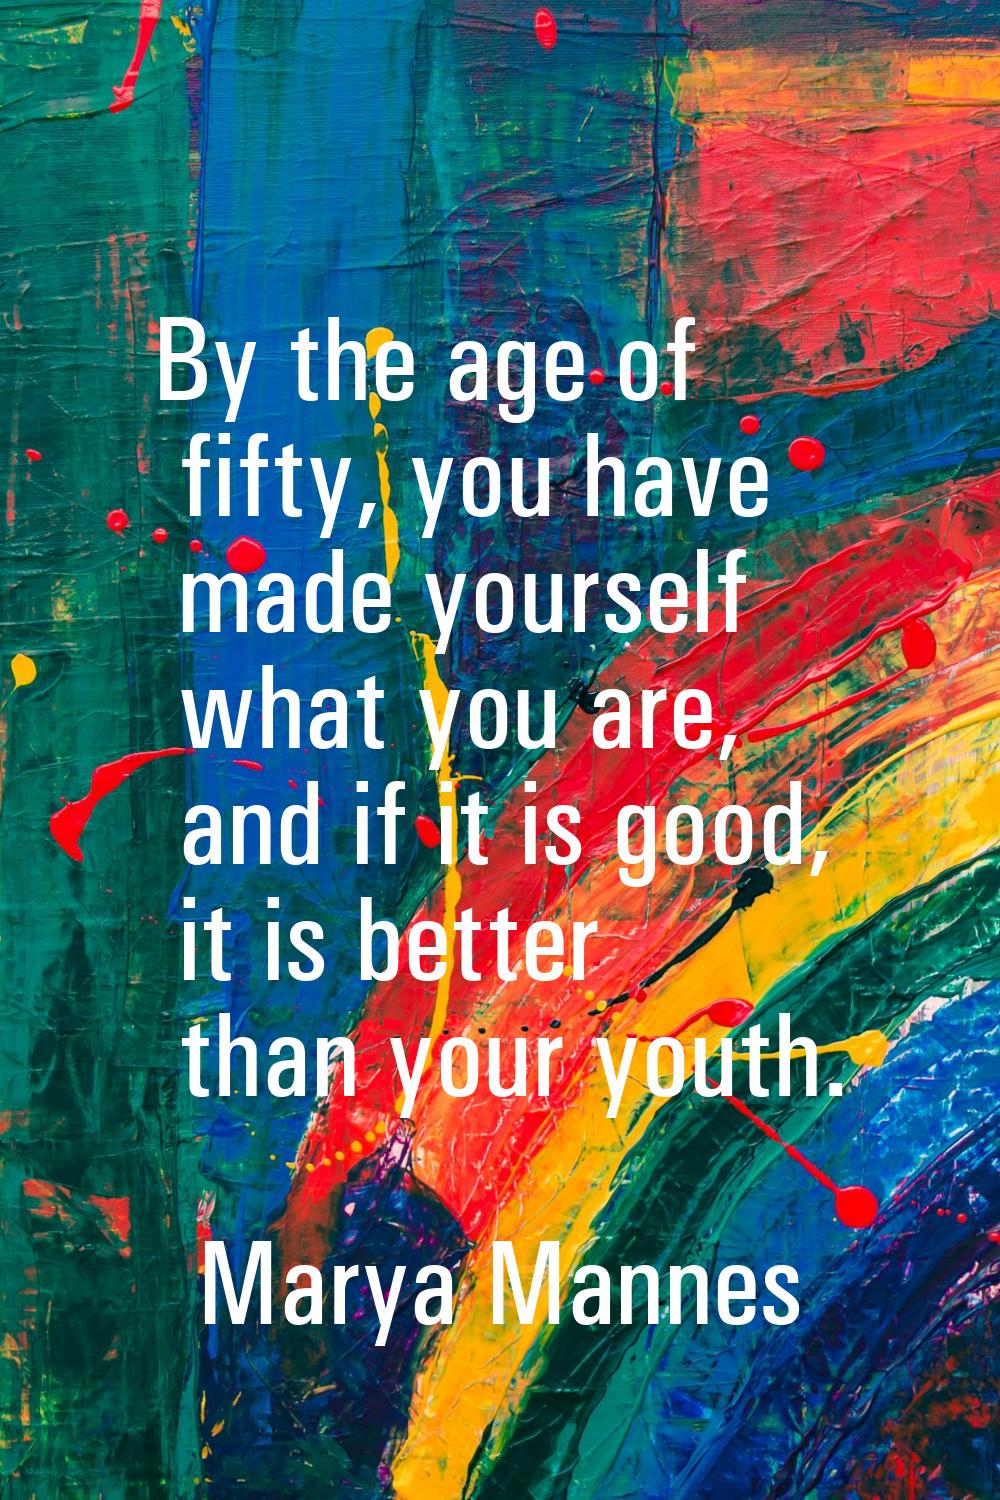 By the age of fifty, you have made yourself what you are, and if it is good, it is better than your